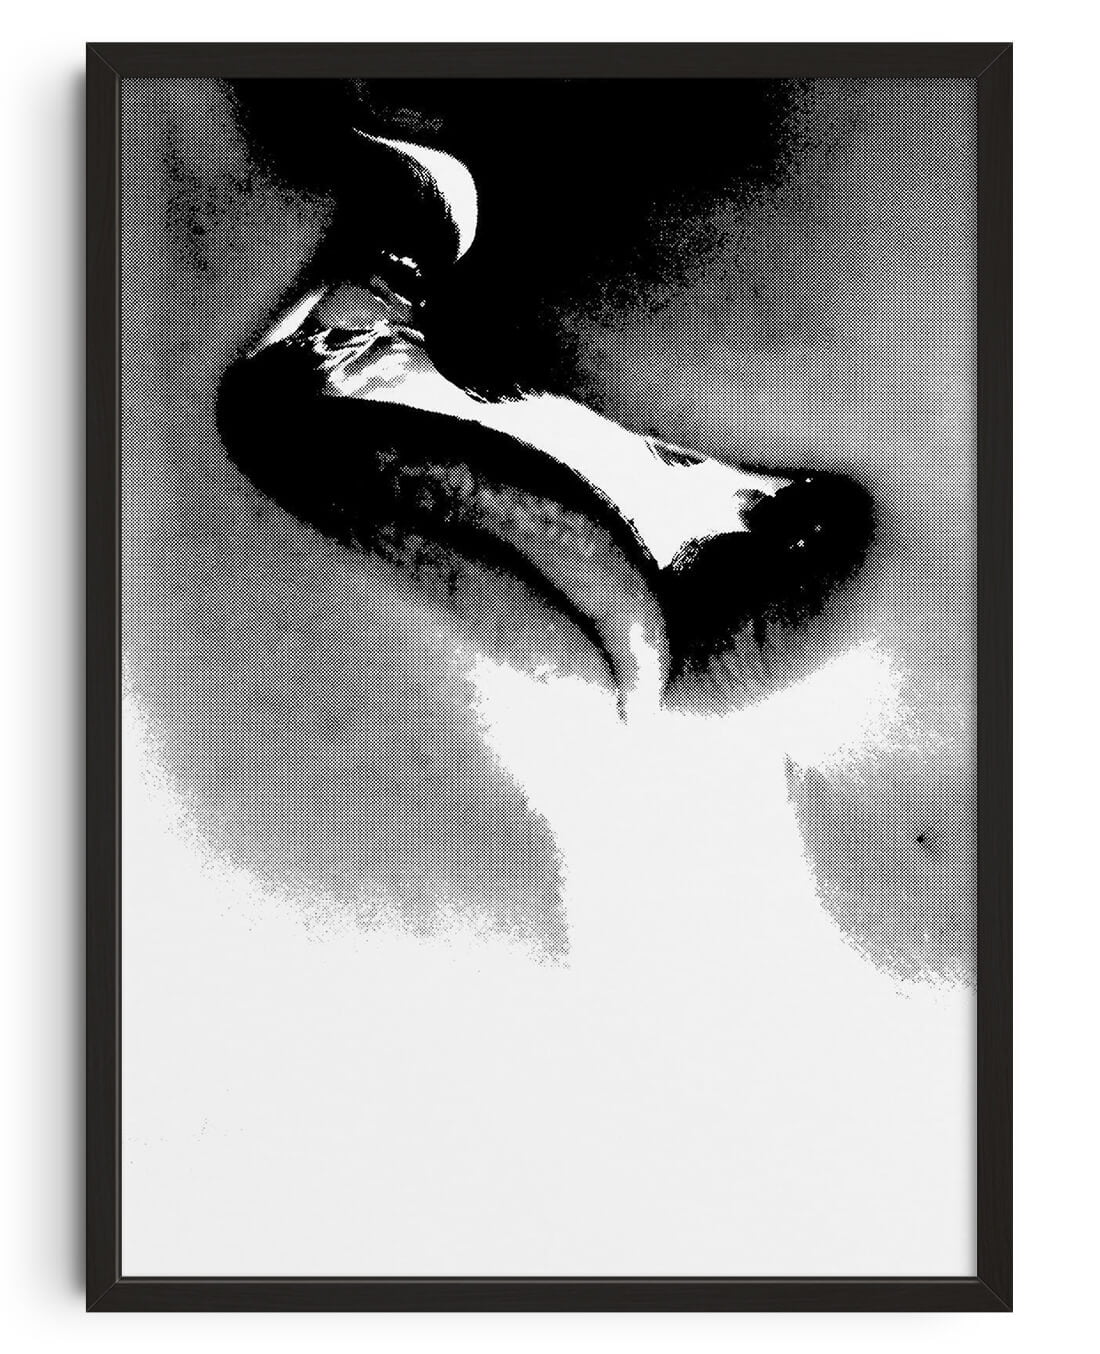 Mouth-to-mouth by Sven Silk contemporary wall art print from DROOL